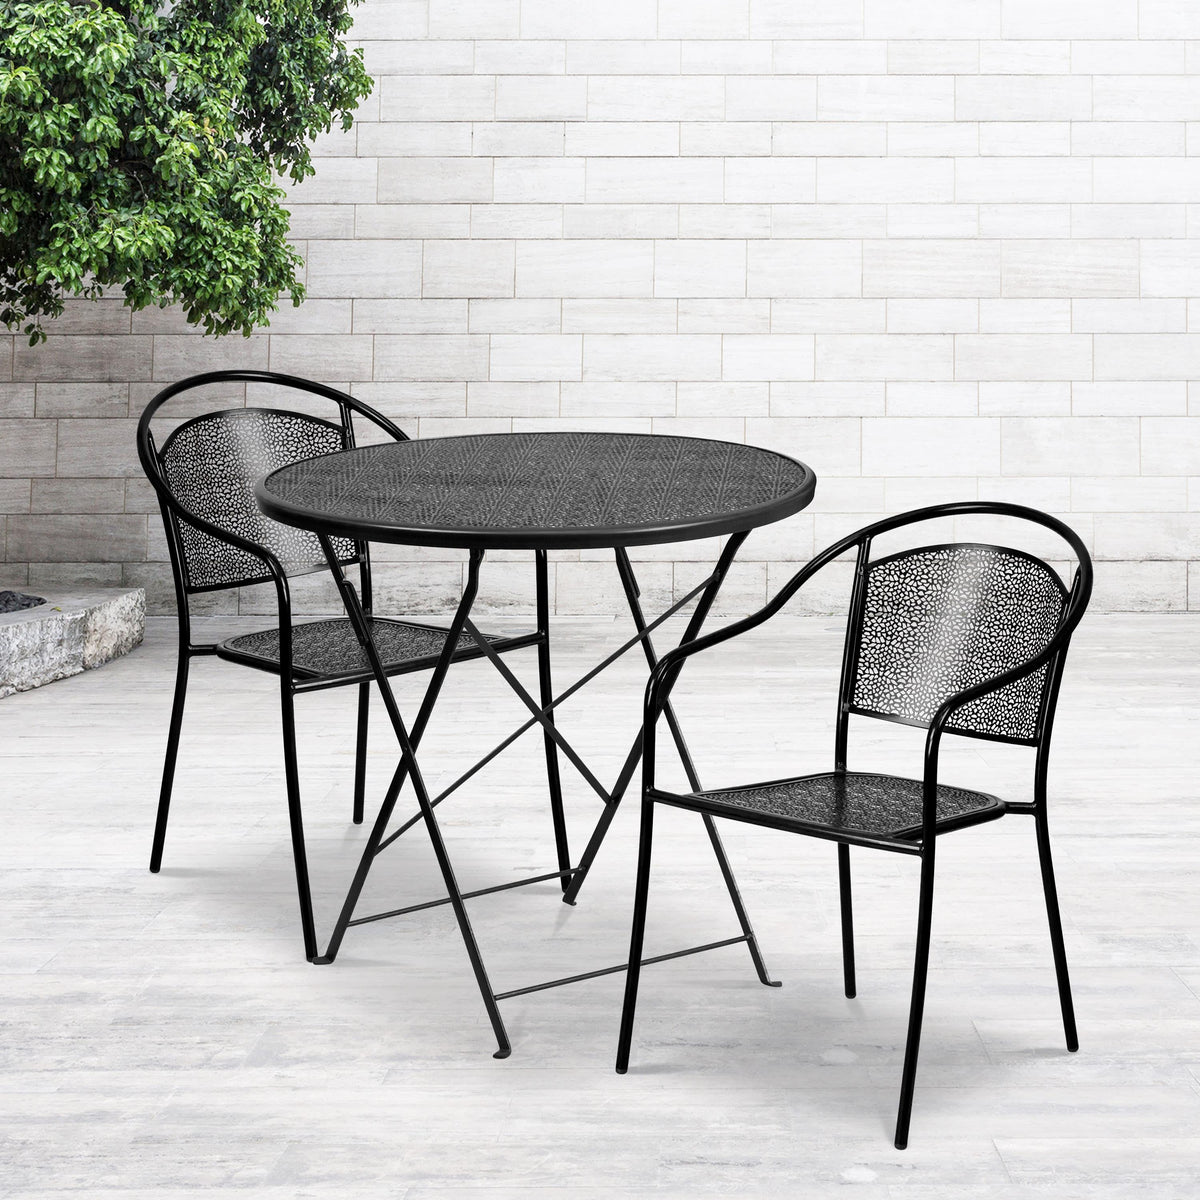 Black |#| 30inch Round Black Indoor-Outdoor Steel Folding Patio Table Set with 2 Chairs